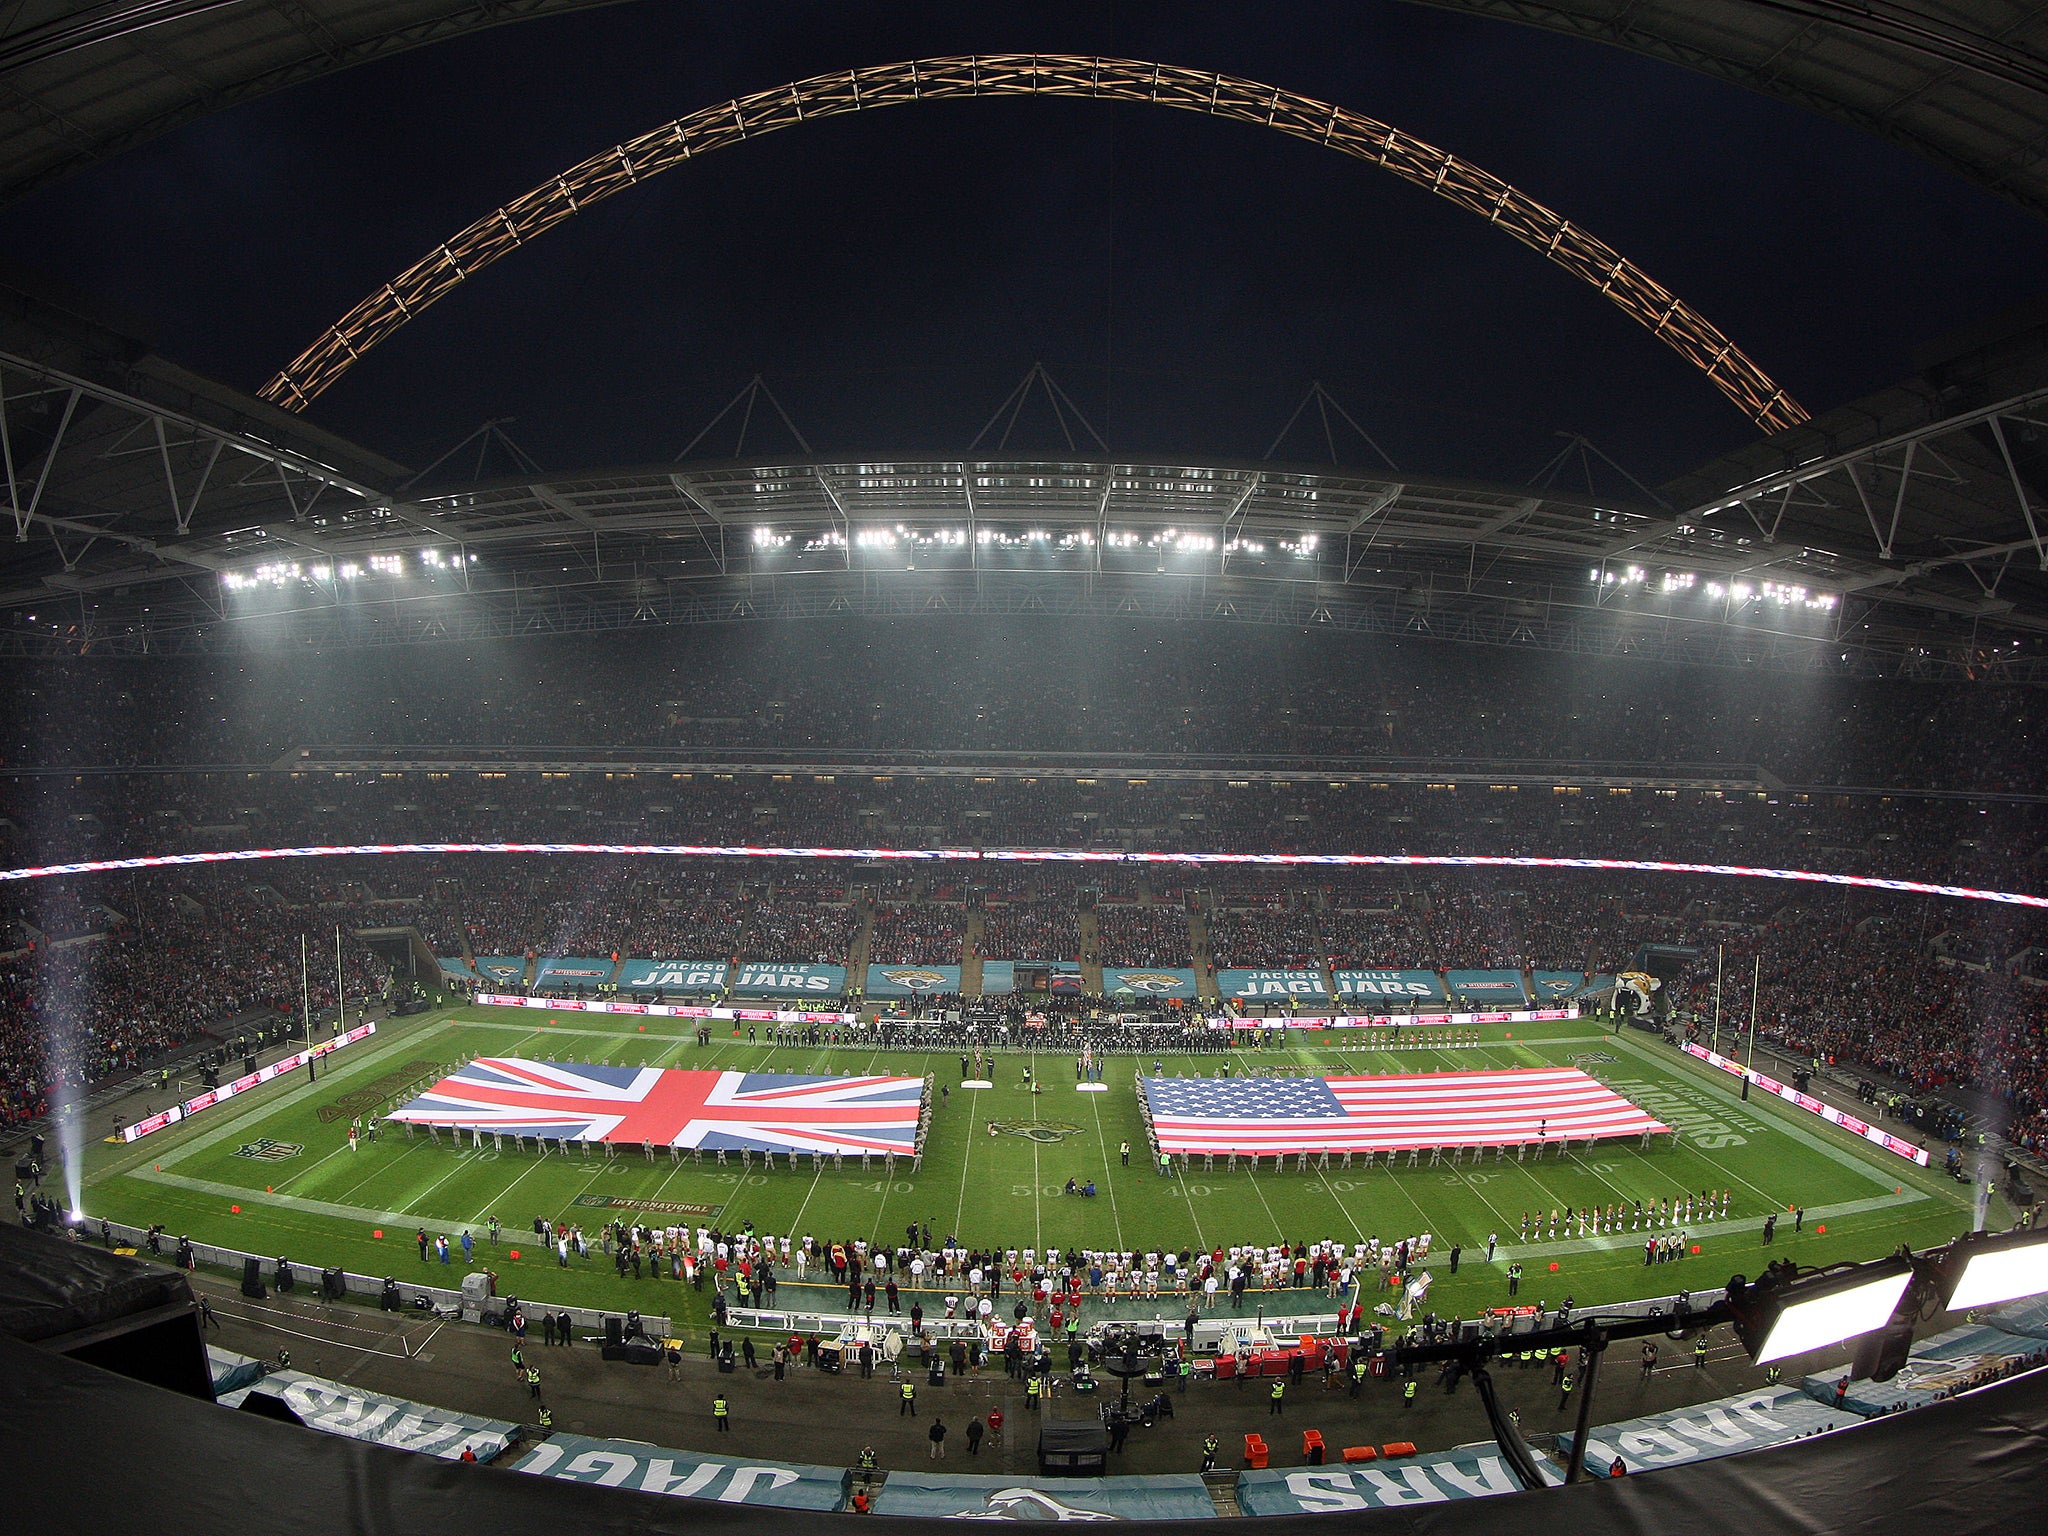 The NFL's International Series has held games at Wembley since its introduction in 2007